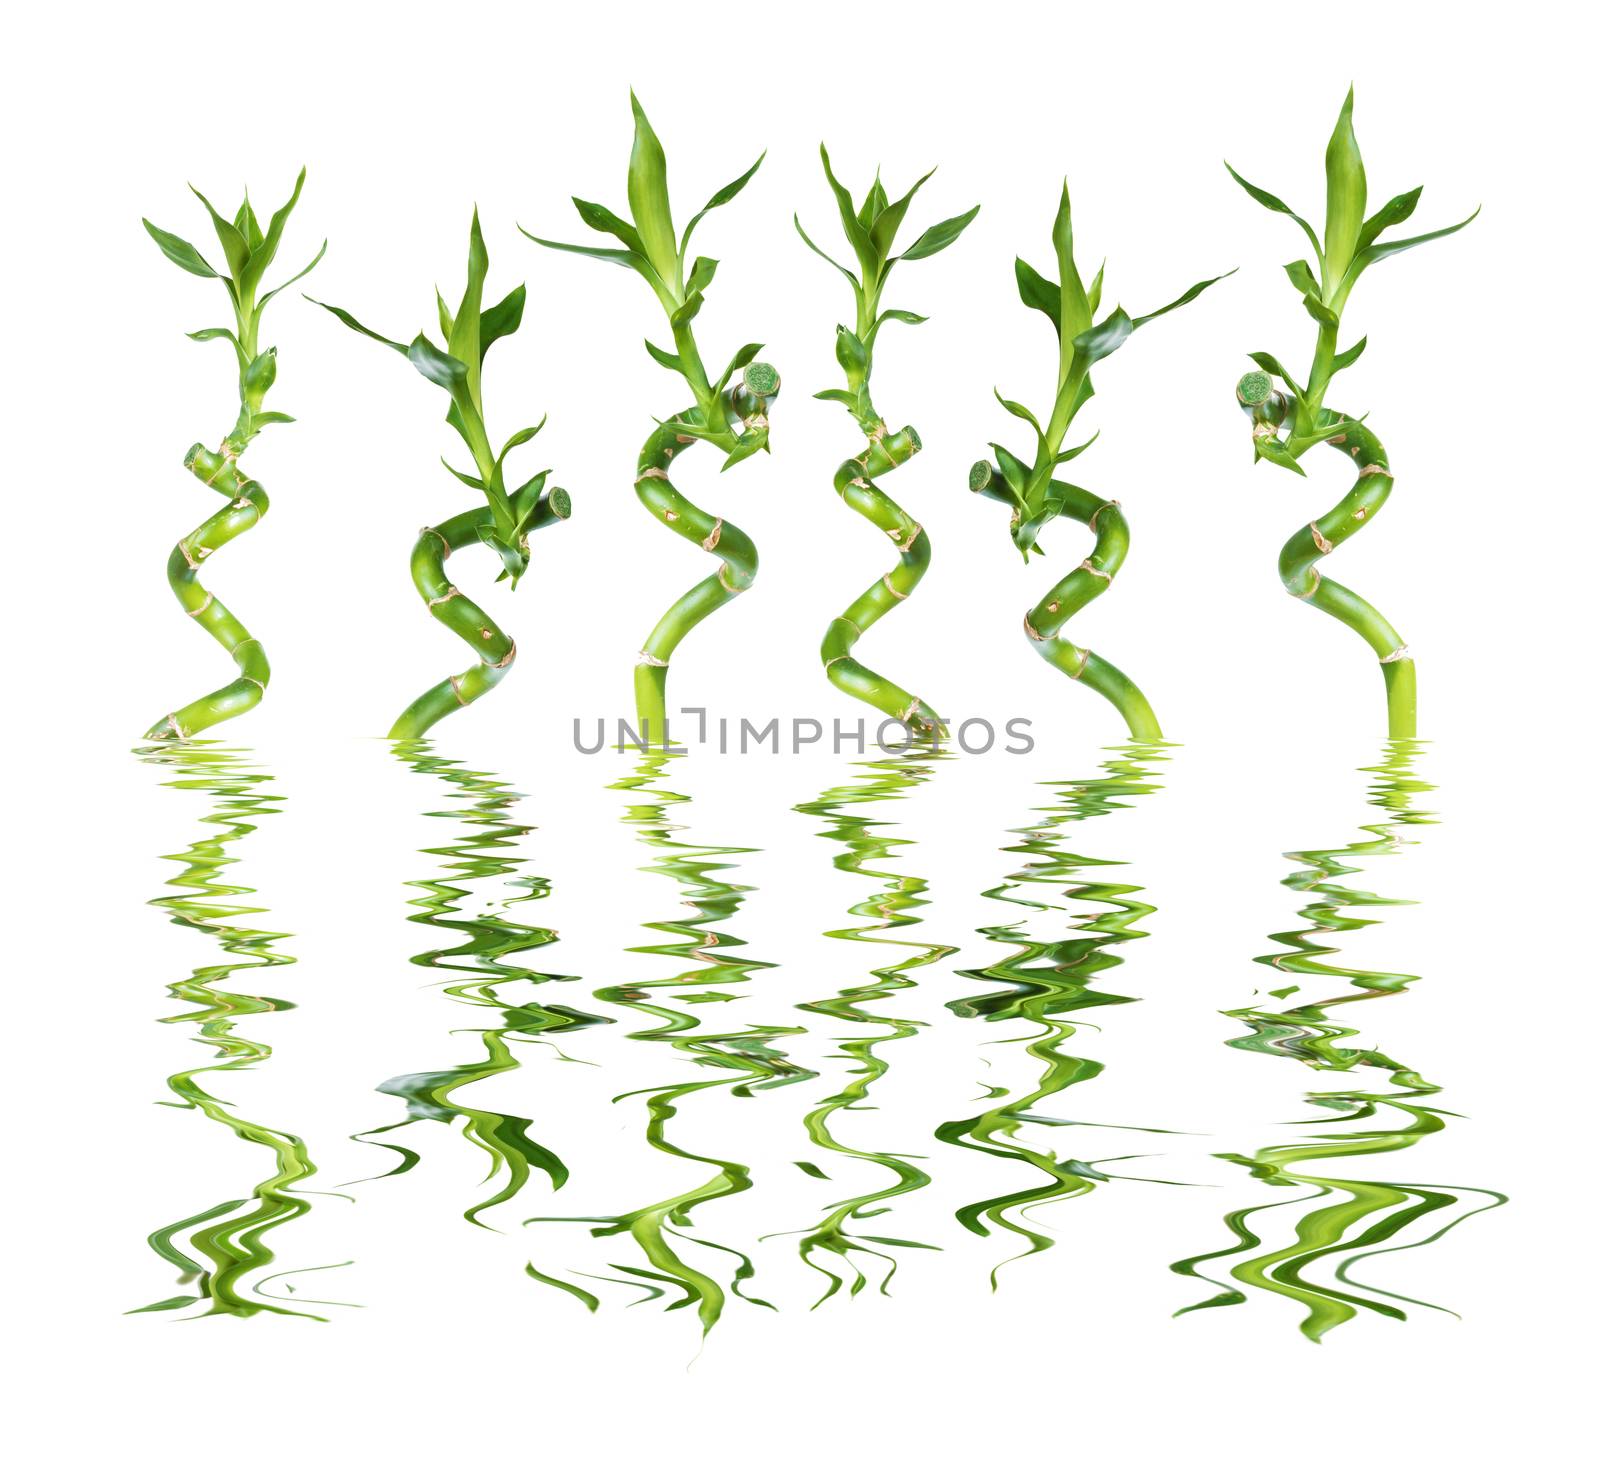 Set of separate stems of Lucky Bamboo (Dracaena Sanderiana) twisted in a spiral shape with green leaves, isolated on white background, reflected in a water surface with small waves
